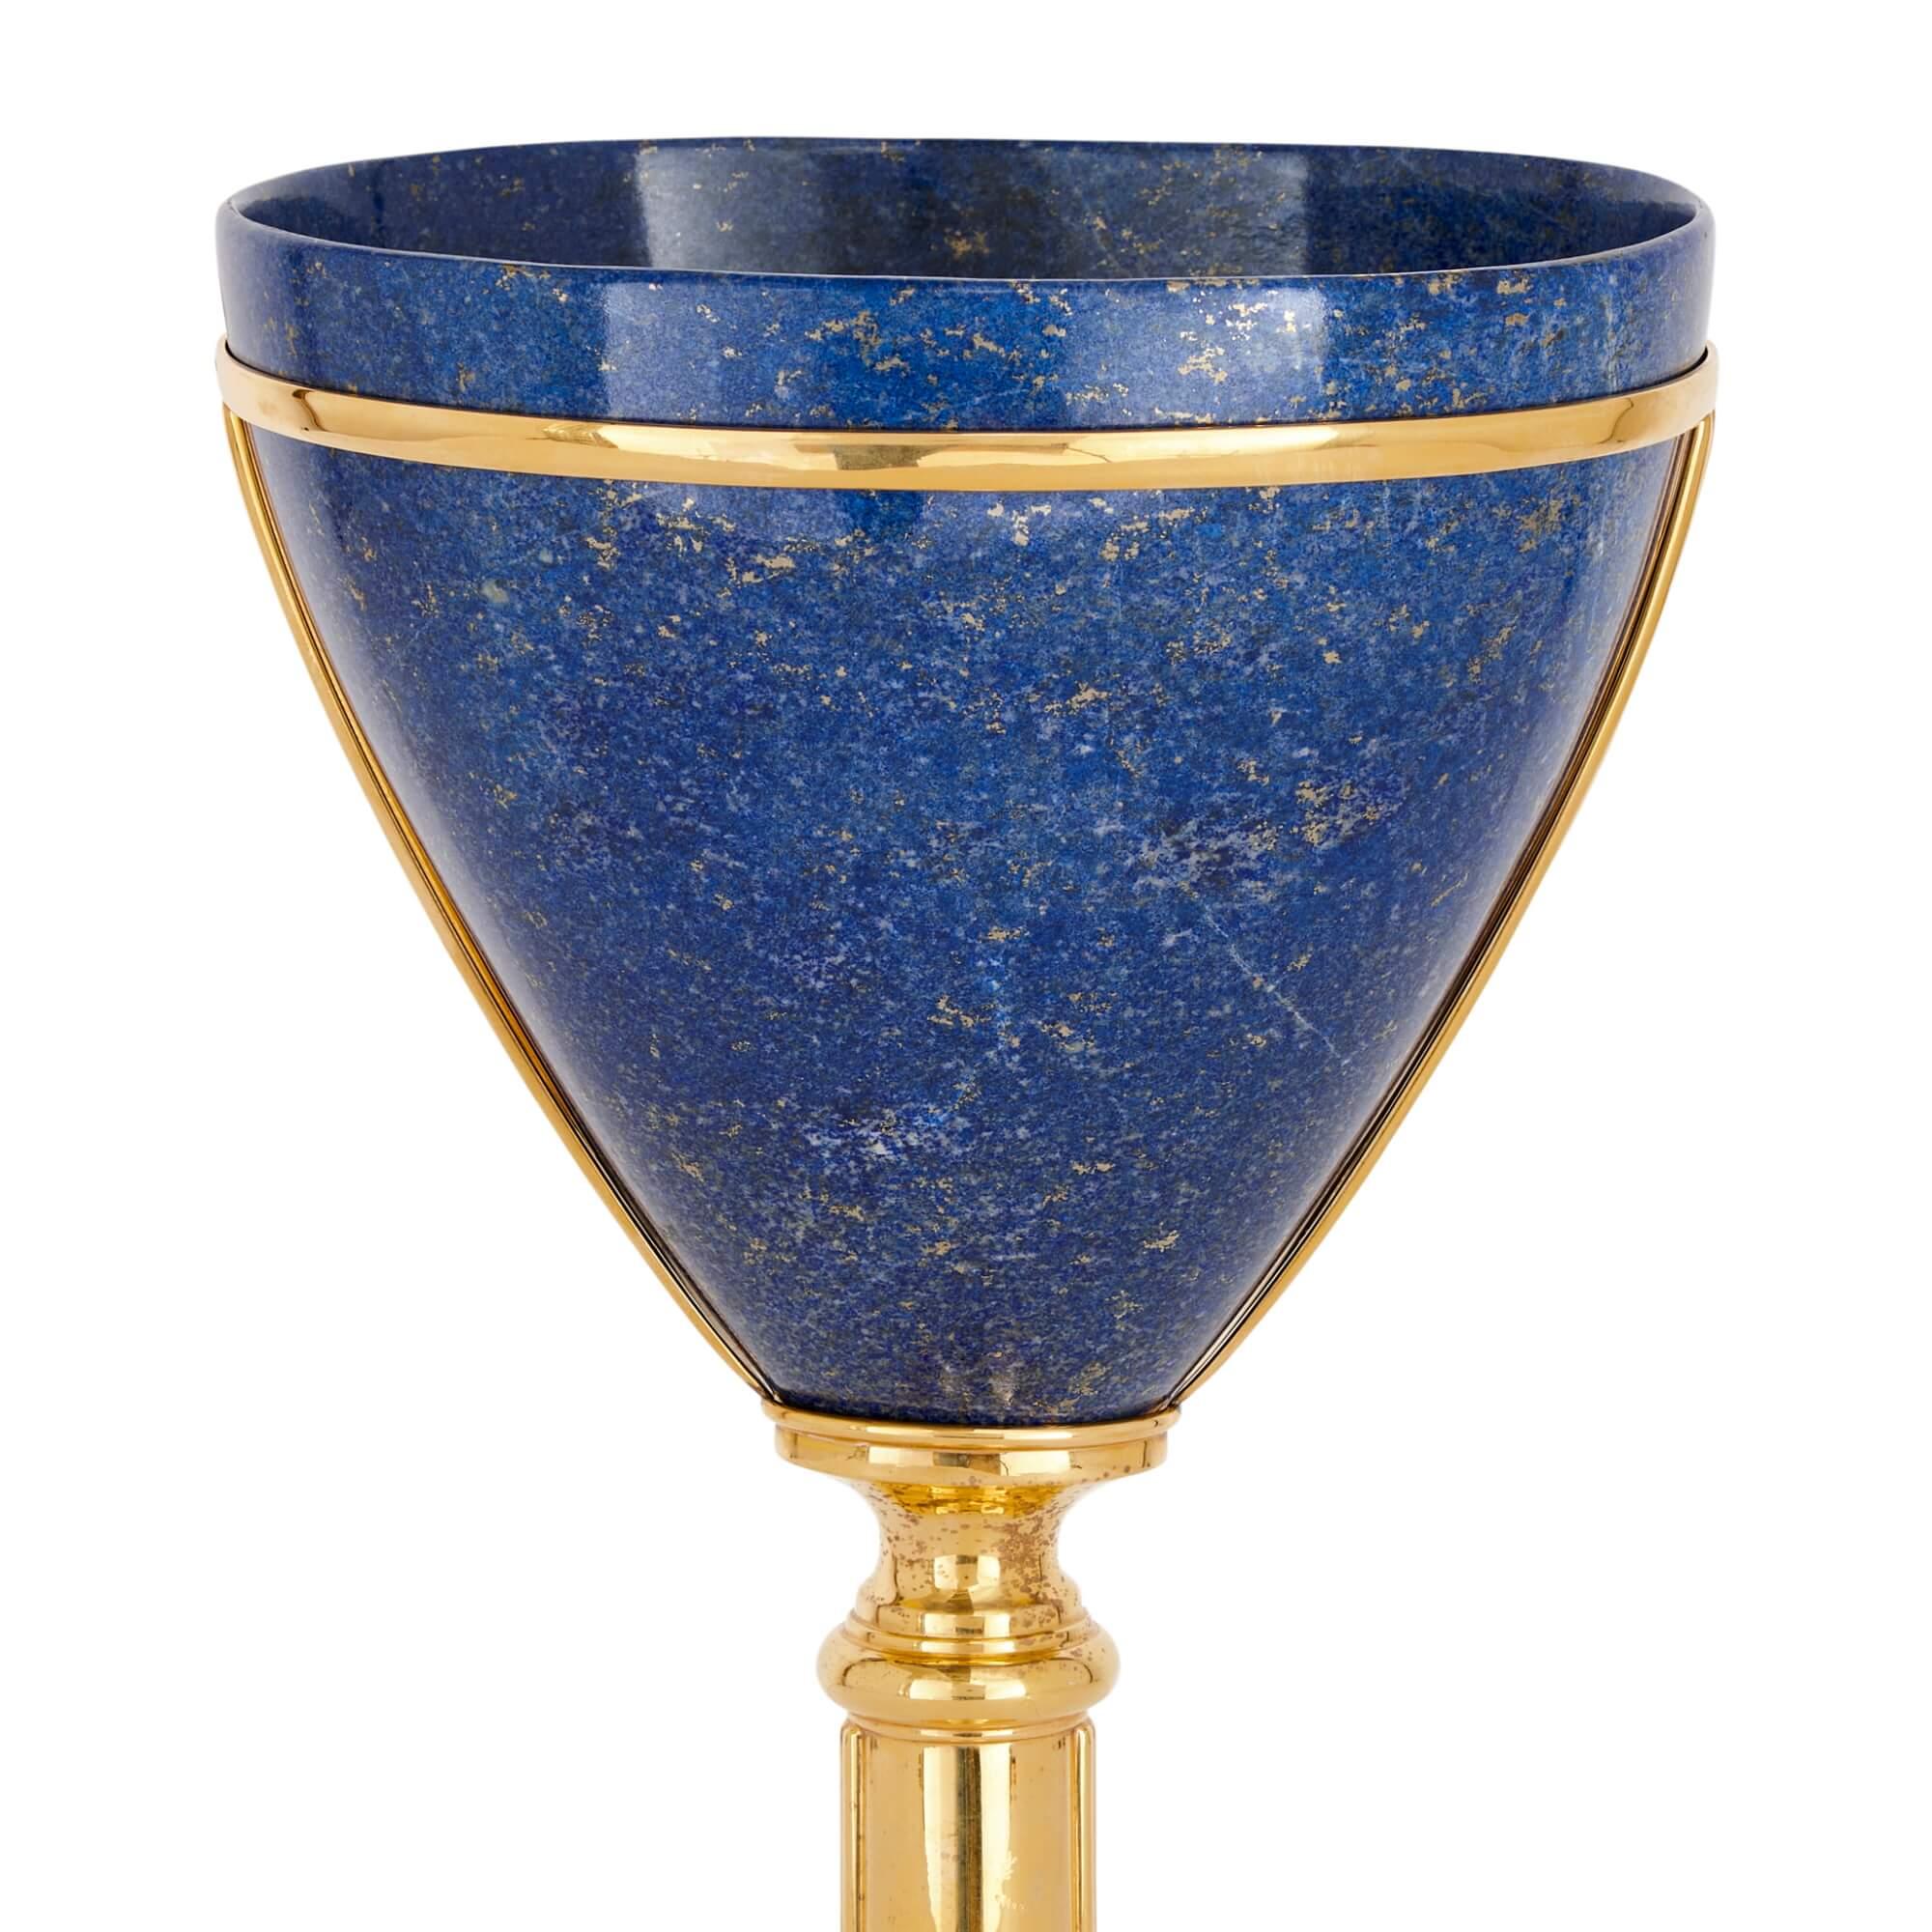 Lapis lazuli and vermeil vase attributed to Asprey
English, c. 1980
Height 51cm, width 24cm, depth 20cm

Attributed to Asprey, the world-famous firm of goldsmiths, silversmiths and jewellers, this vase is of a modern and elegant design. 

The goblet